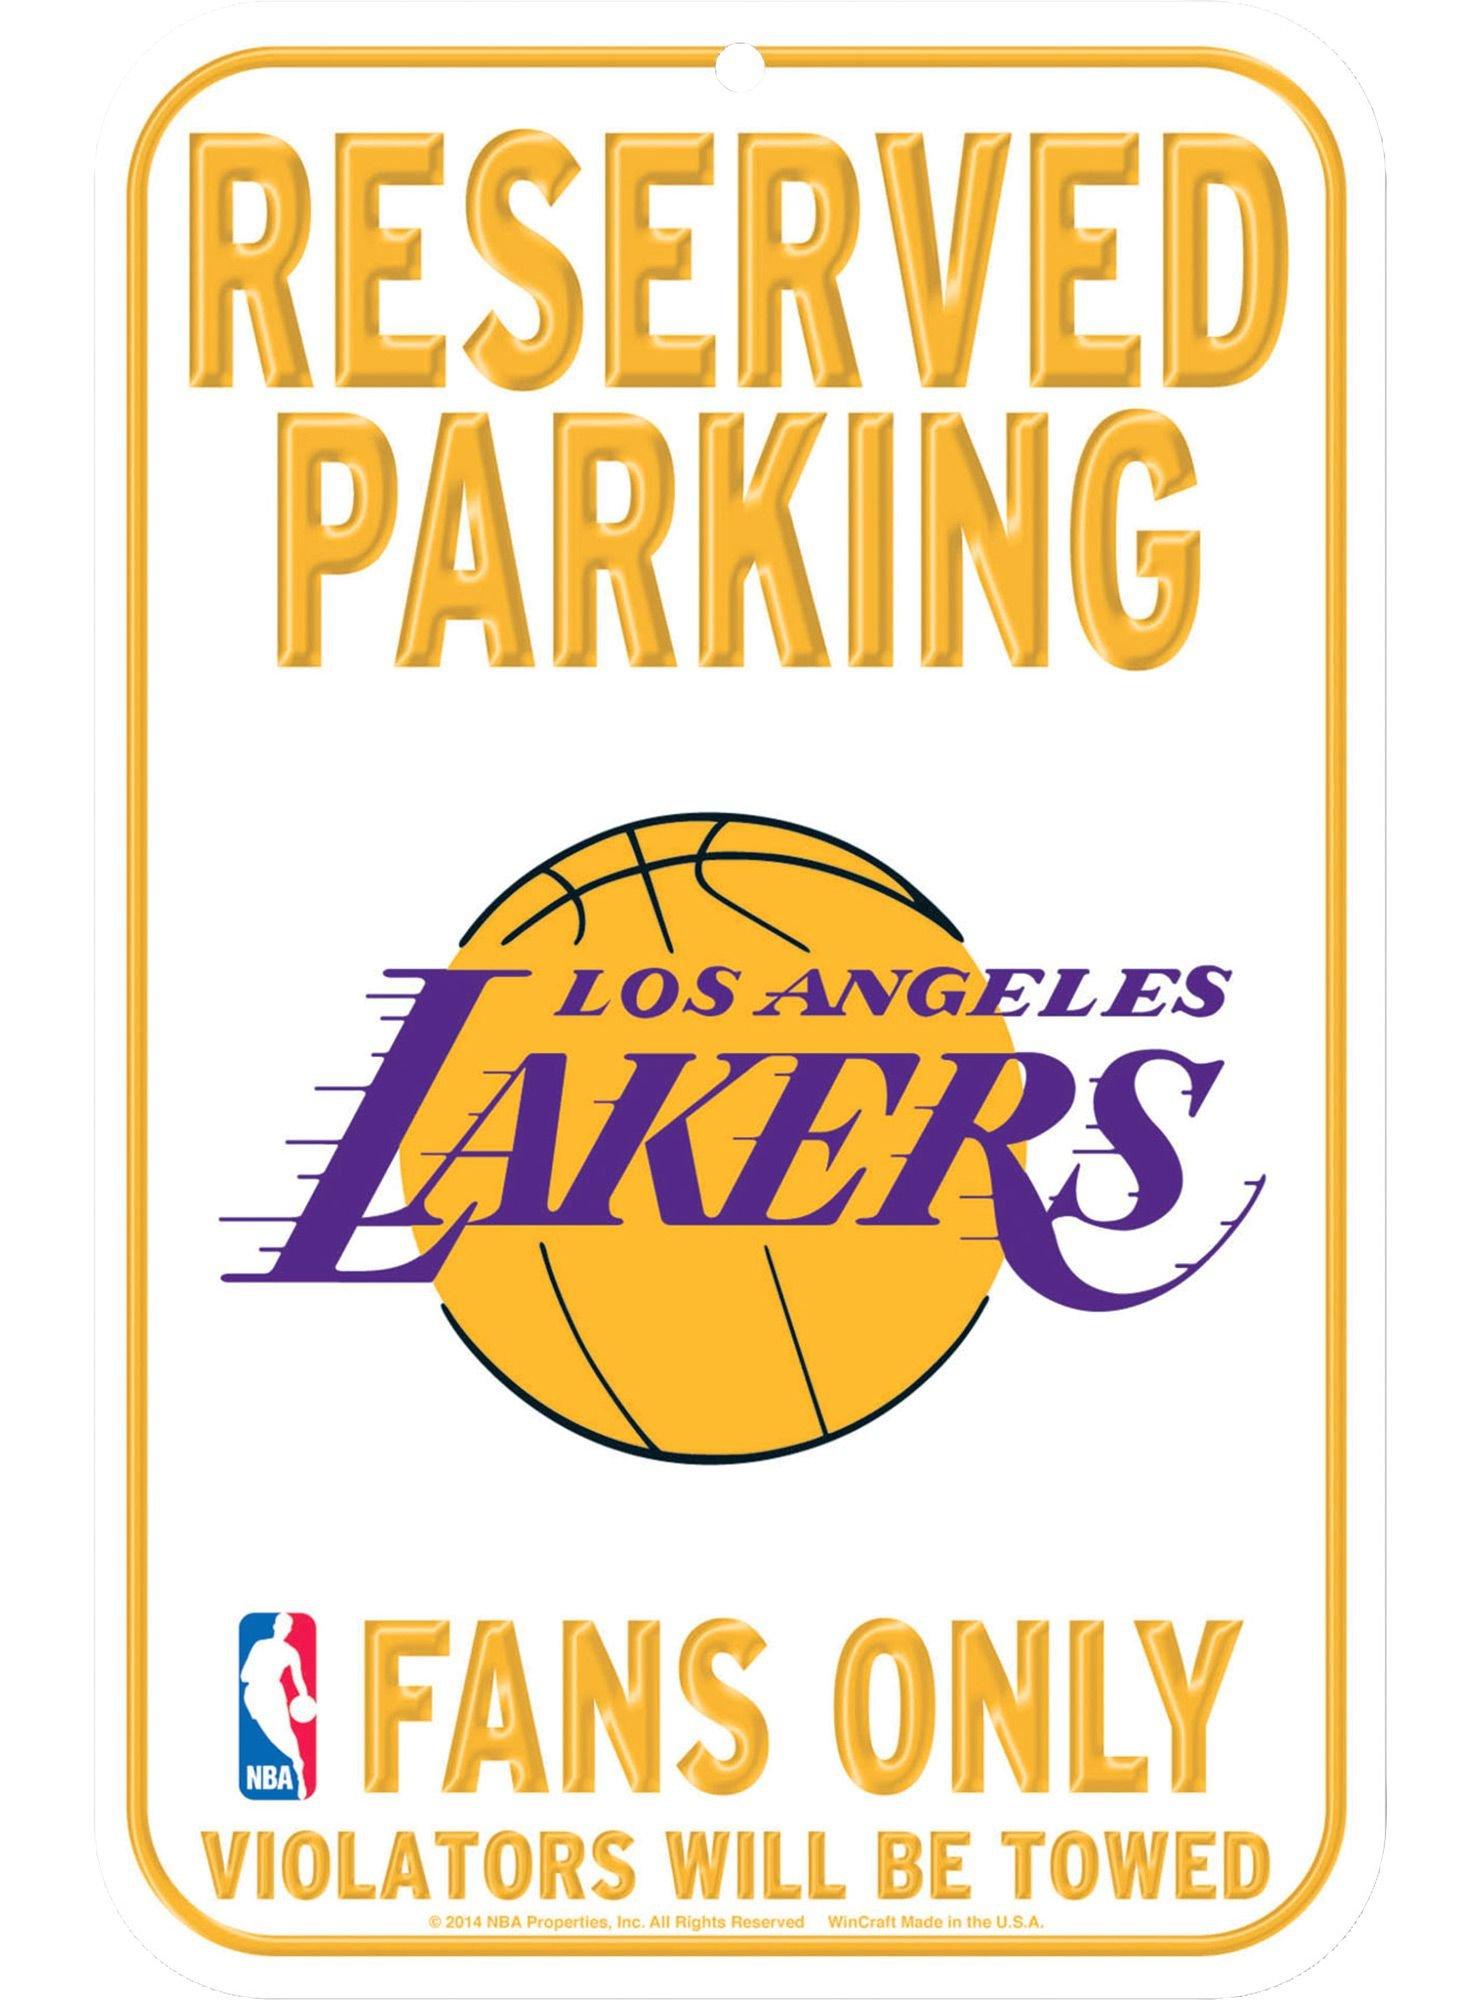 Los Angeles Lakers on X: Show us your Hollywood Nights spirit